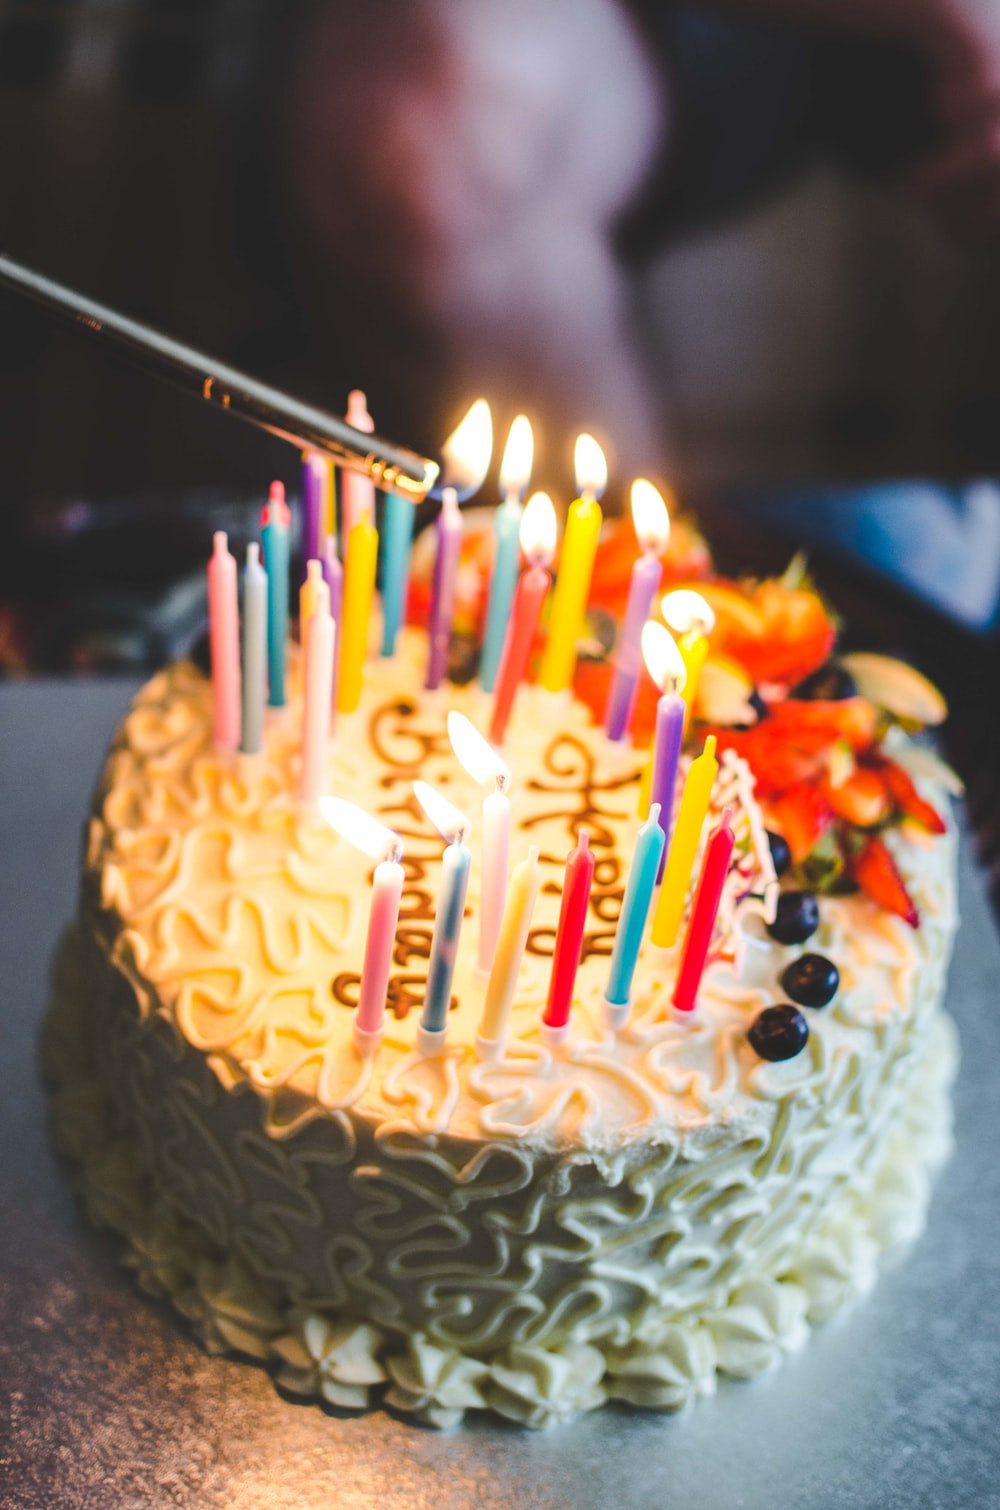 Picture Of Birthday Cakes
 icing cake on table photo – Free Birthday cake Image on